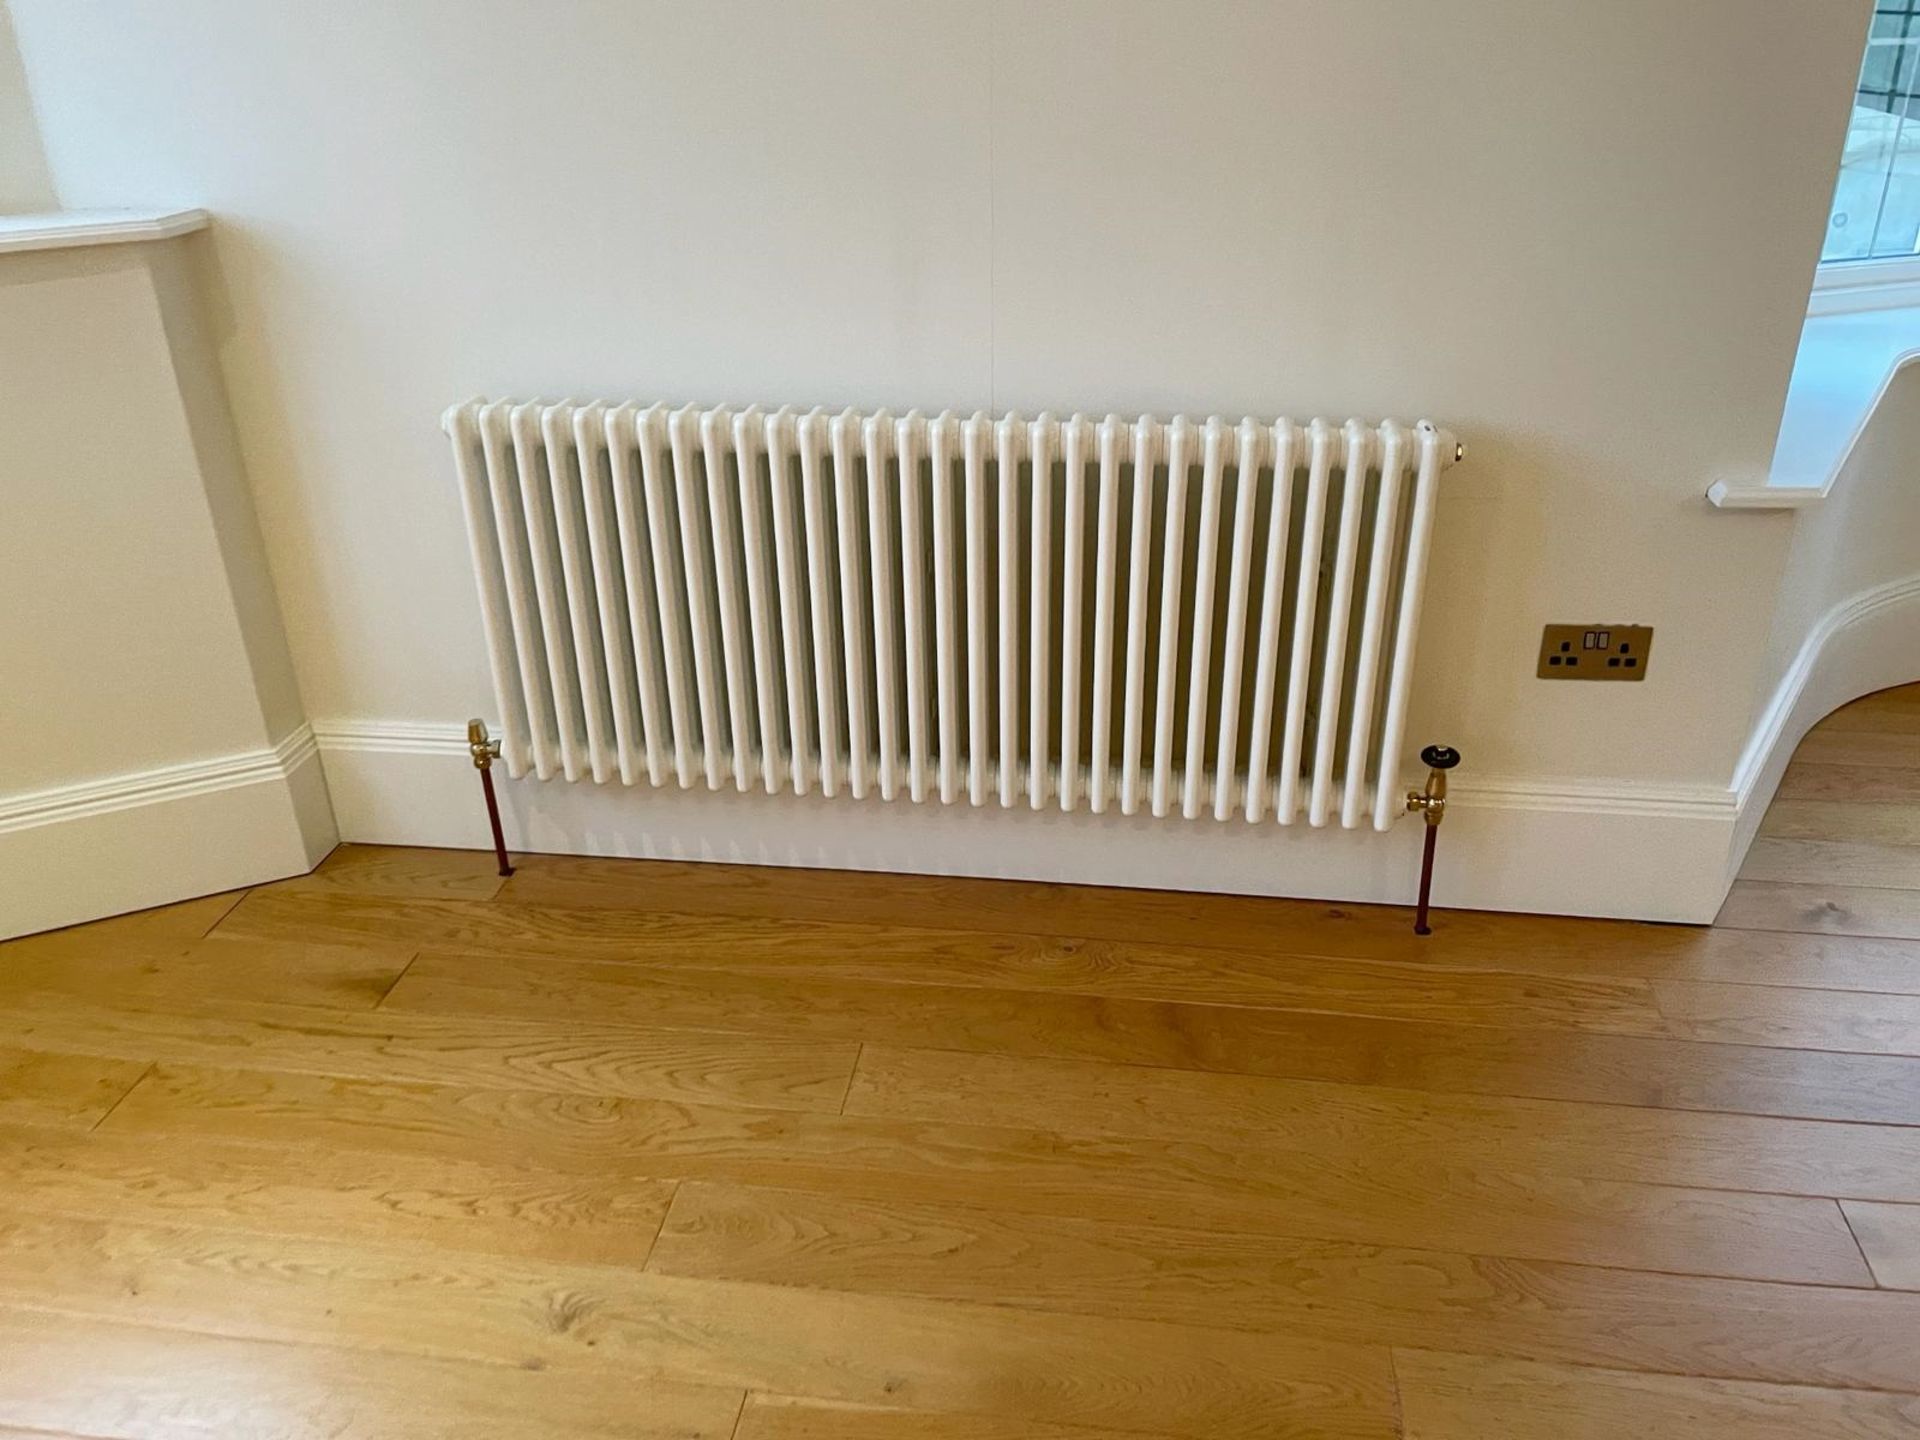 Approximately 17-metres of Timber Painted Skirting Boards in White, Height 23cm - Ref: PAN177 - Image 7 of 8